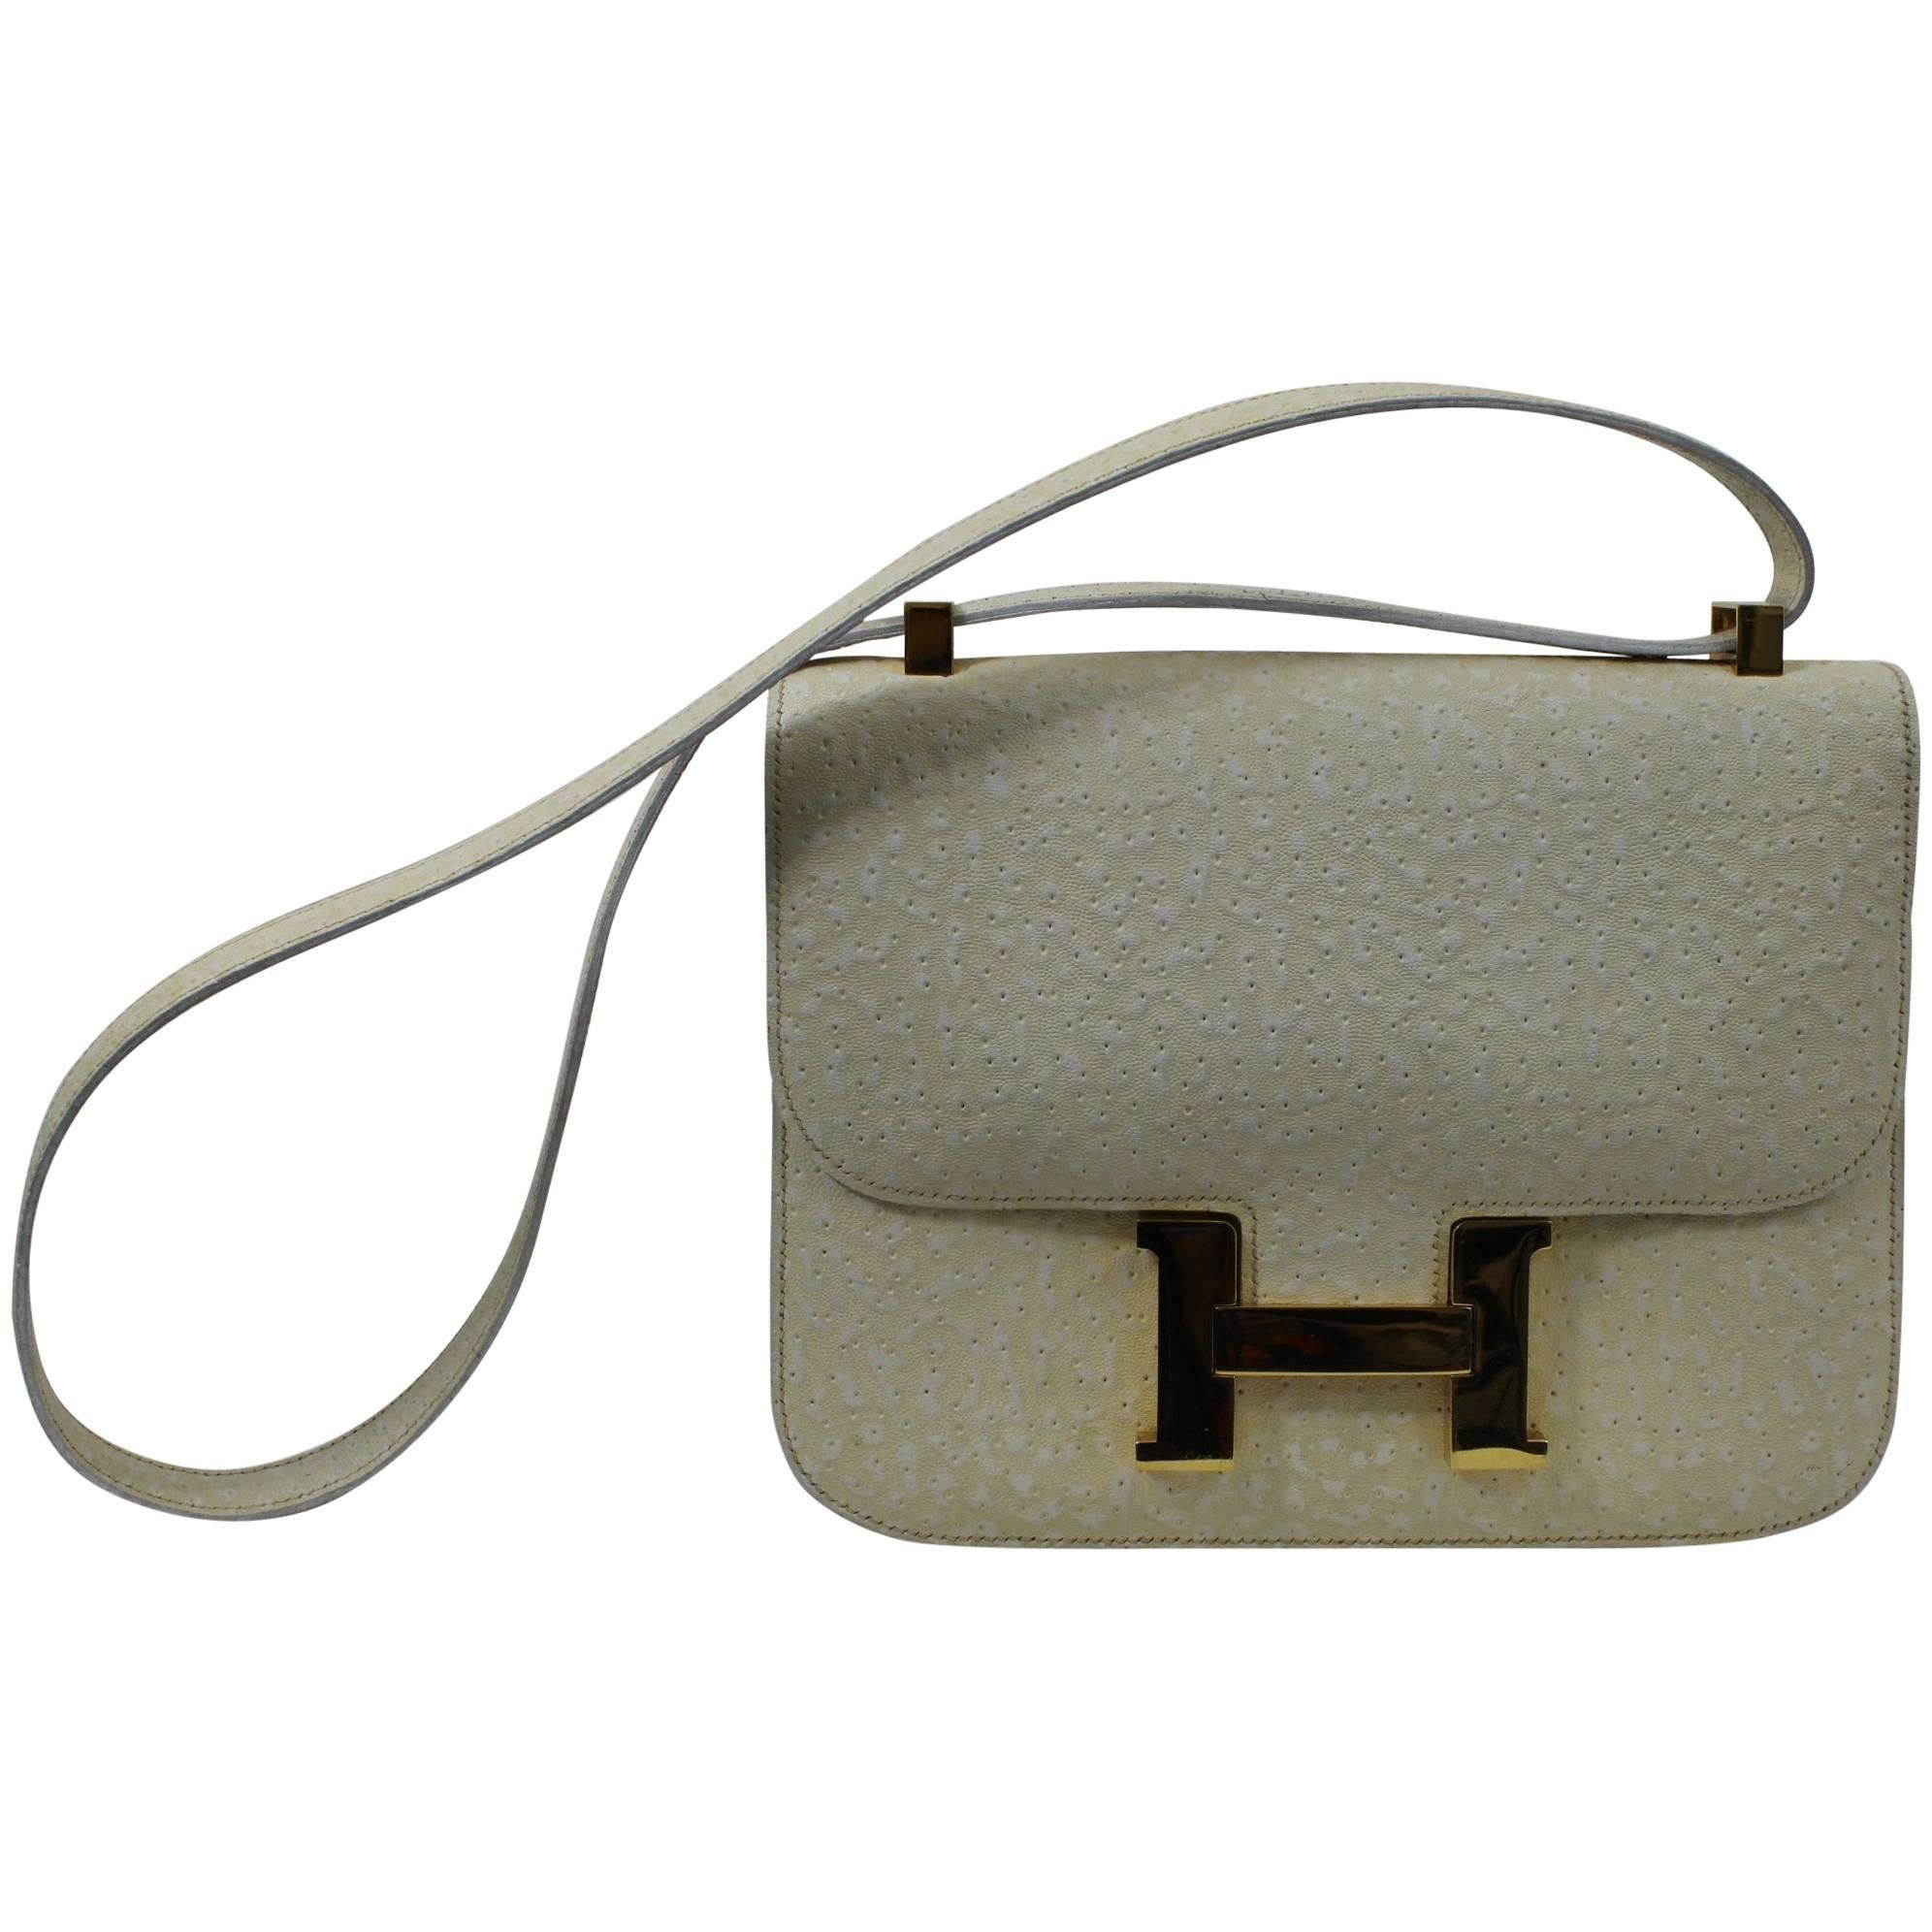 1973 Hermes Constance Bag in Beluga Leather    For Sale